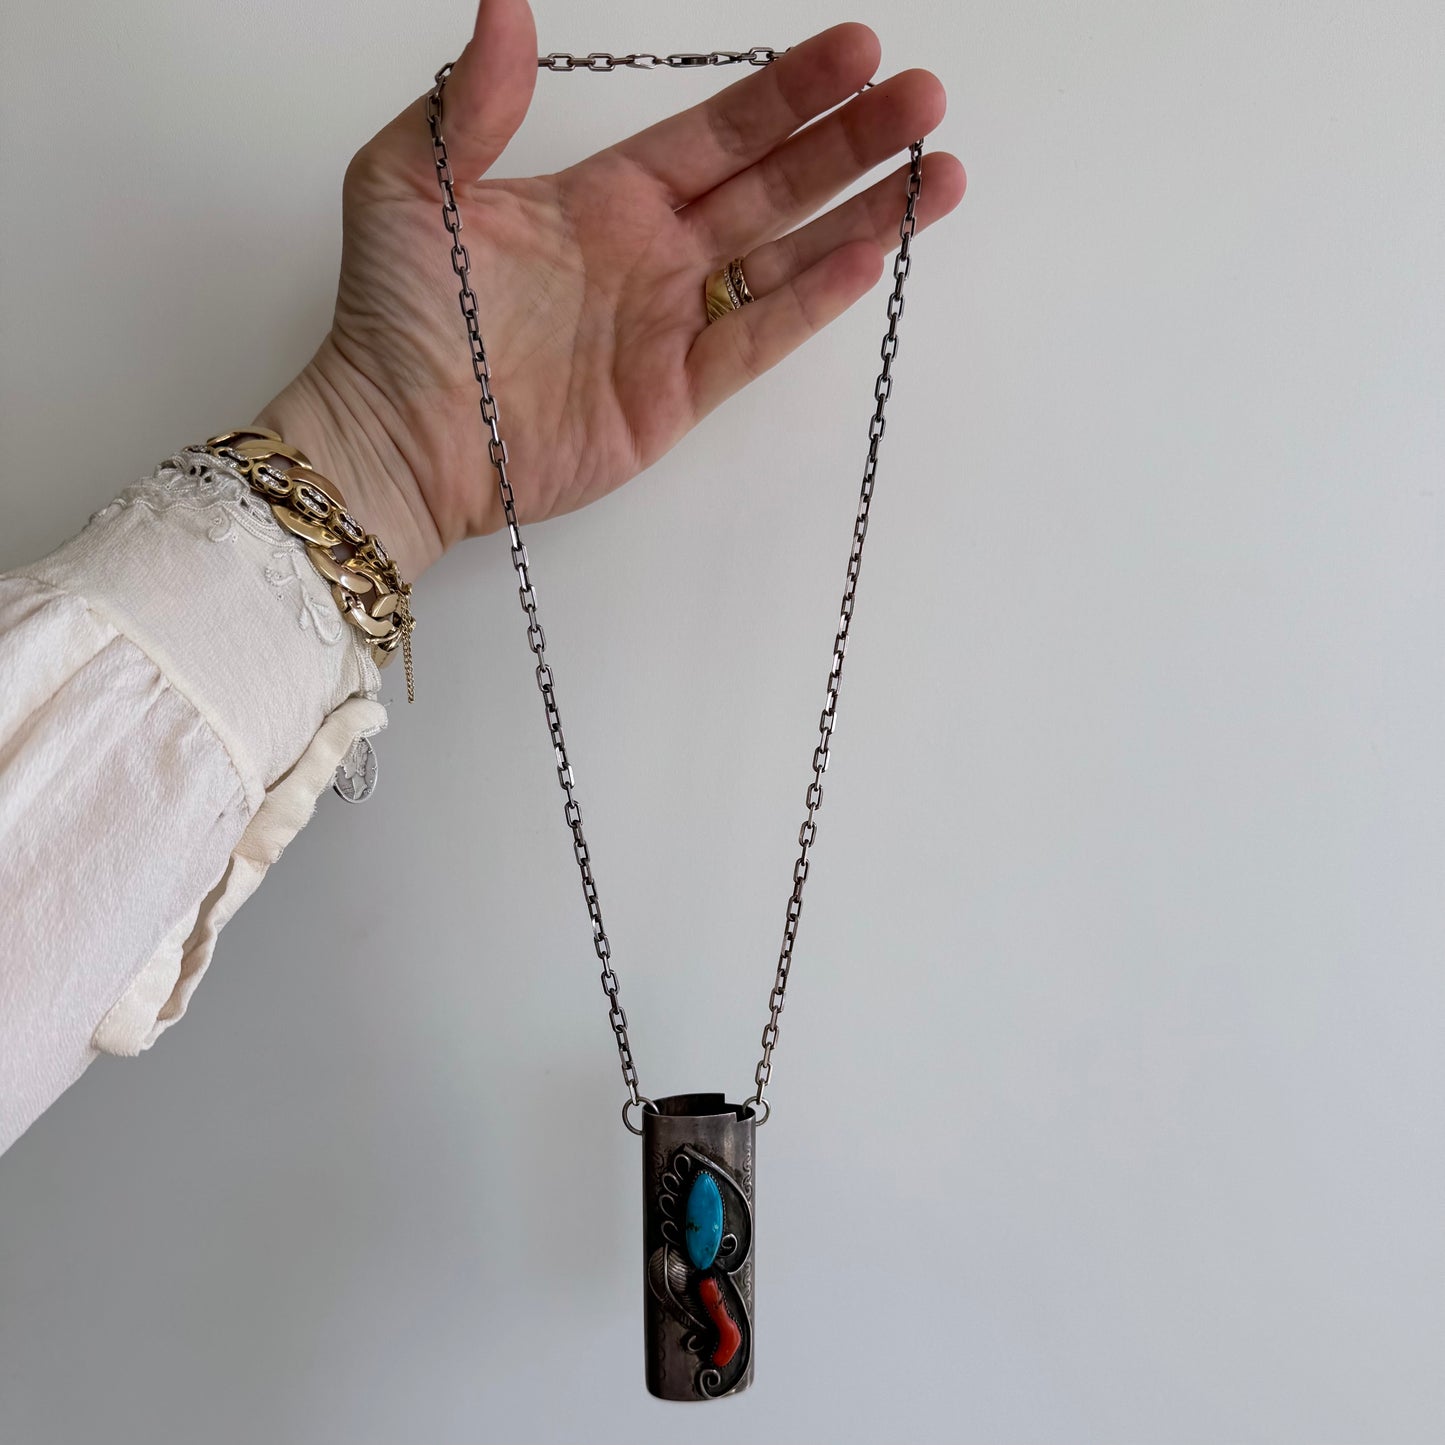 reimagined V I N T A G E // wearable lighter case / sterling silver bic lighter case pendant necklace with turquoise and coral / 23.25", 37g